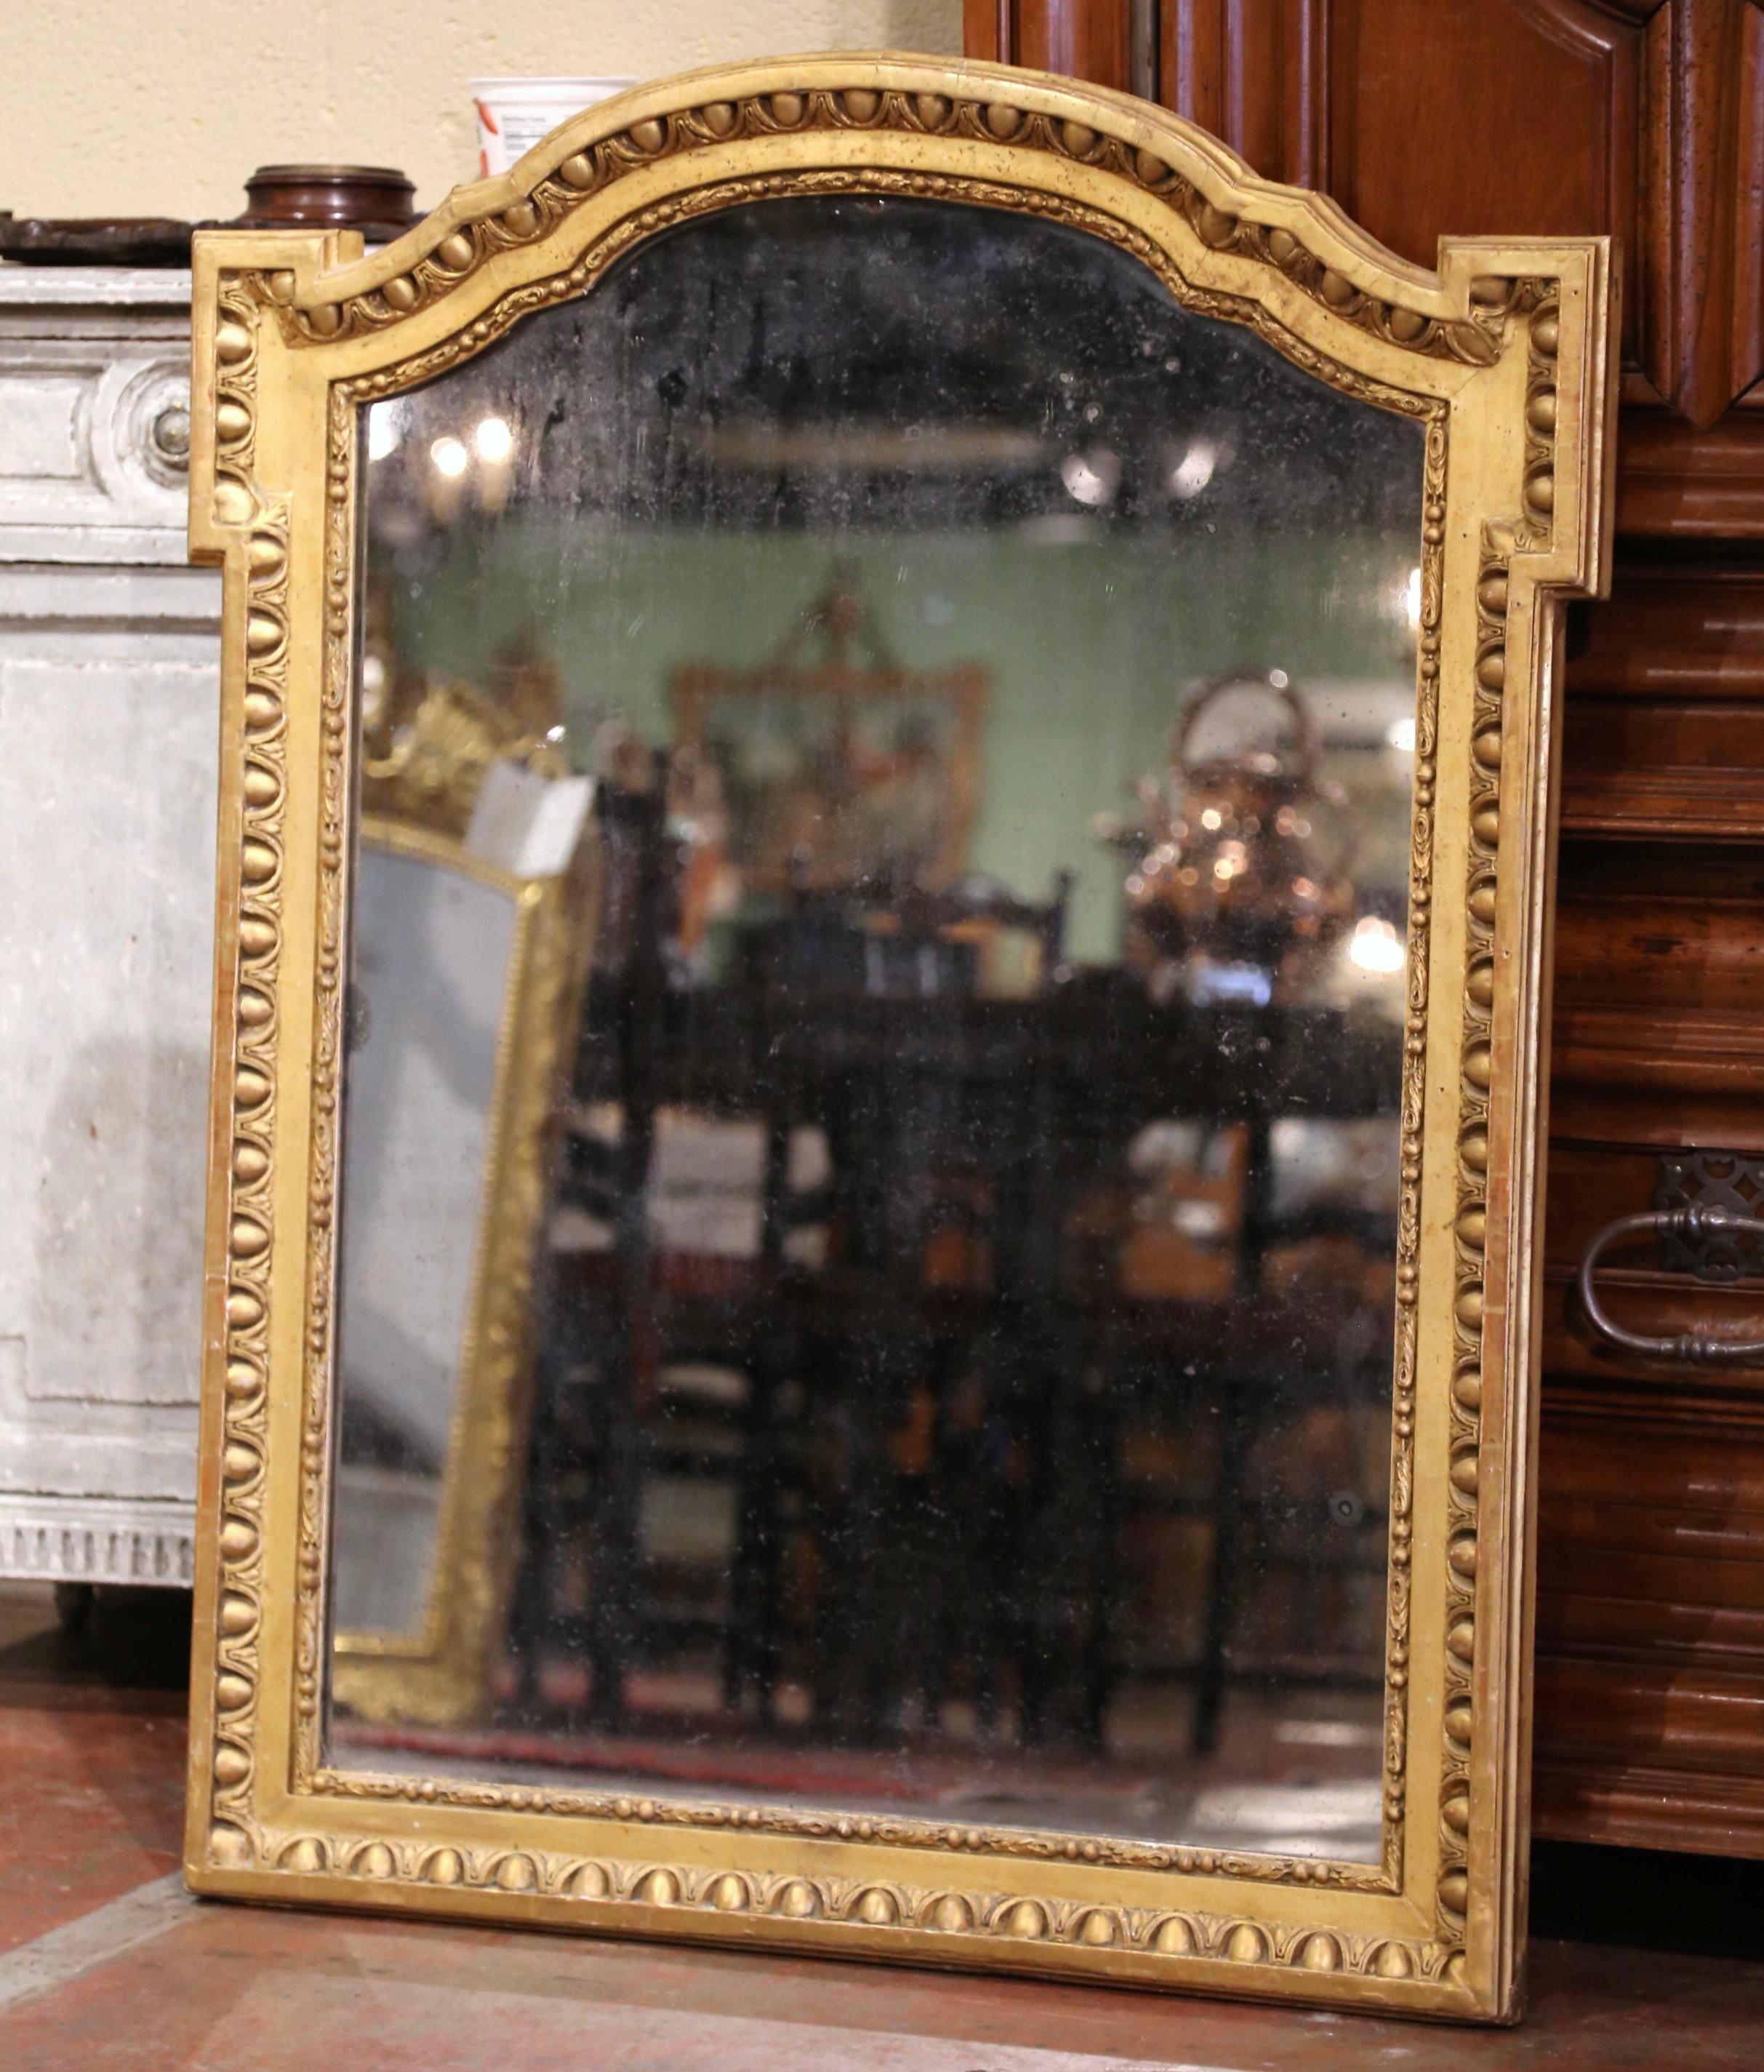 Decorate an entry or a bedroom with this elegant antique mirror. Crafted in the Burgundy region of France, circa 1860, the rectangular mirror has traditional, timeless lines with an elegant arched top. The carved frame is decorated with a luxurious